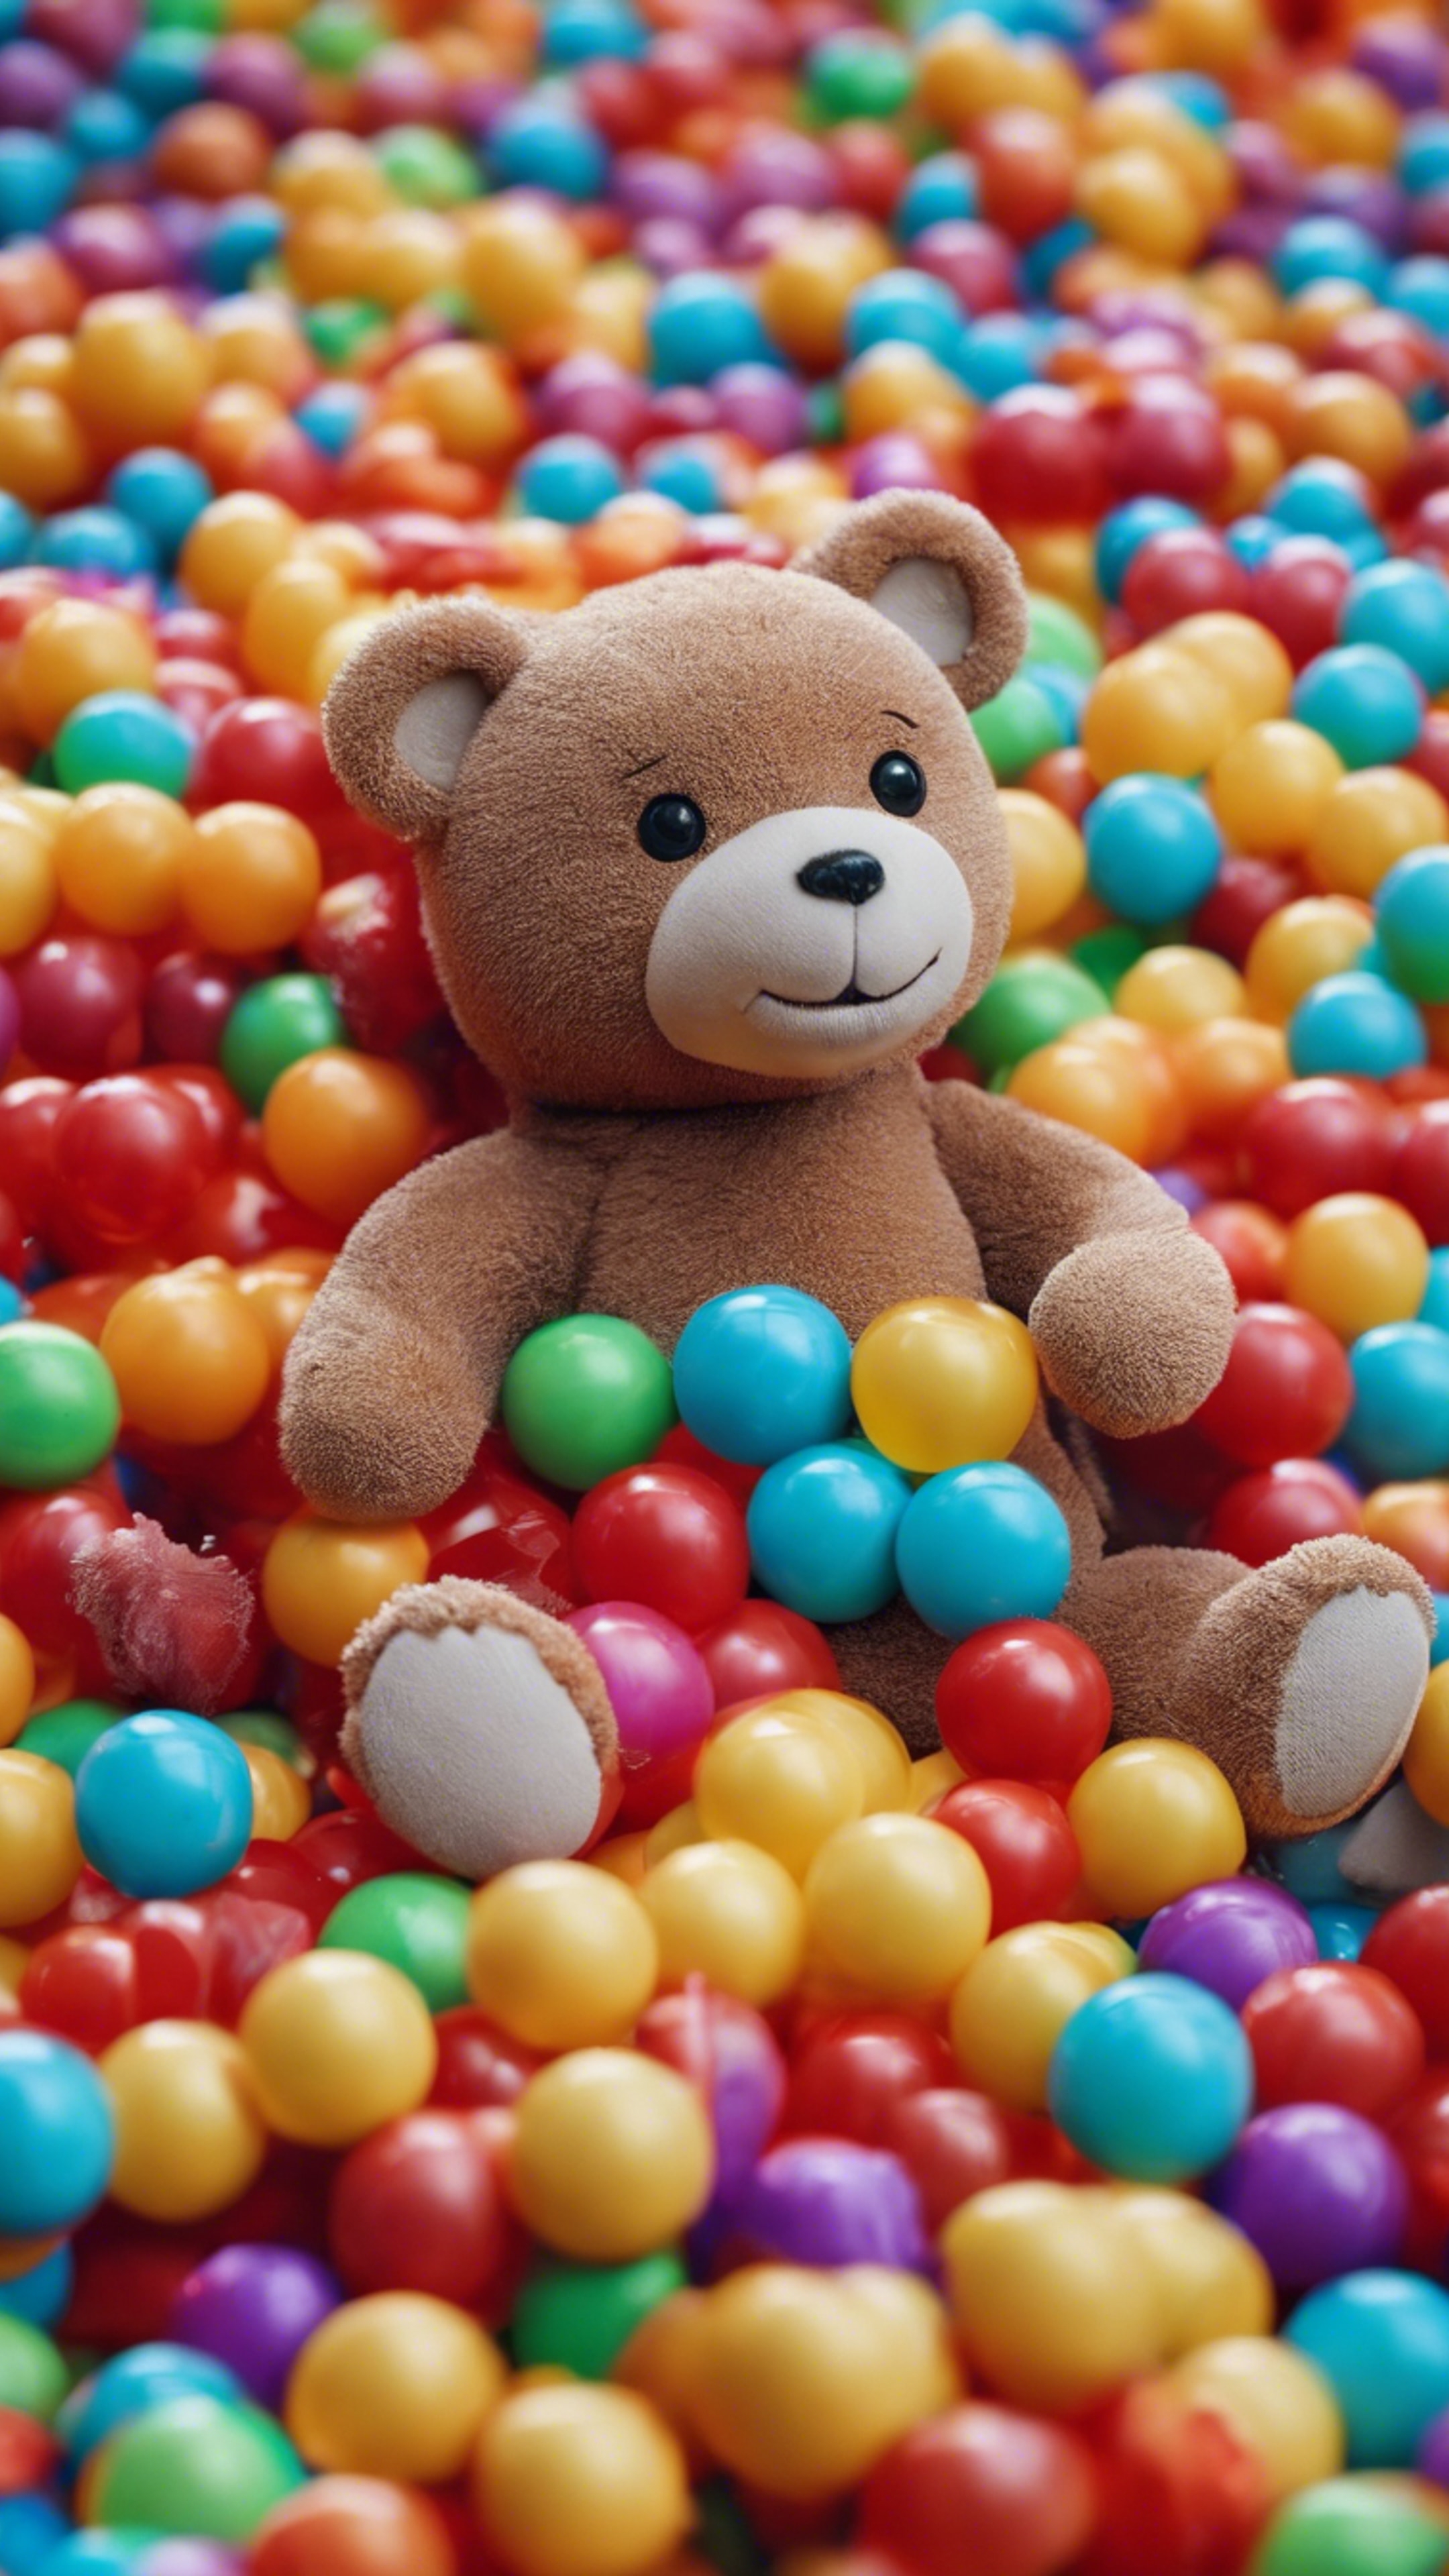 A teddy bear diving into a pool of colorful plastic balls in a fun-filled indoor playground.壁紙[5d1b98e2803e4169bb1b]